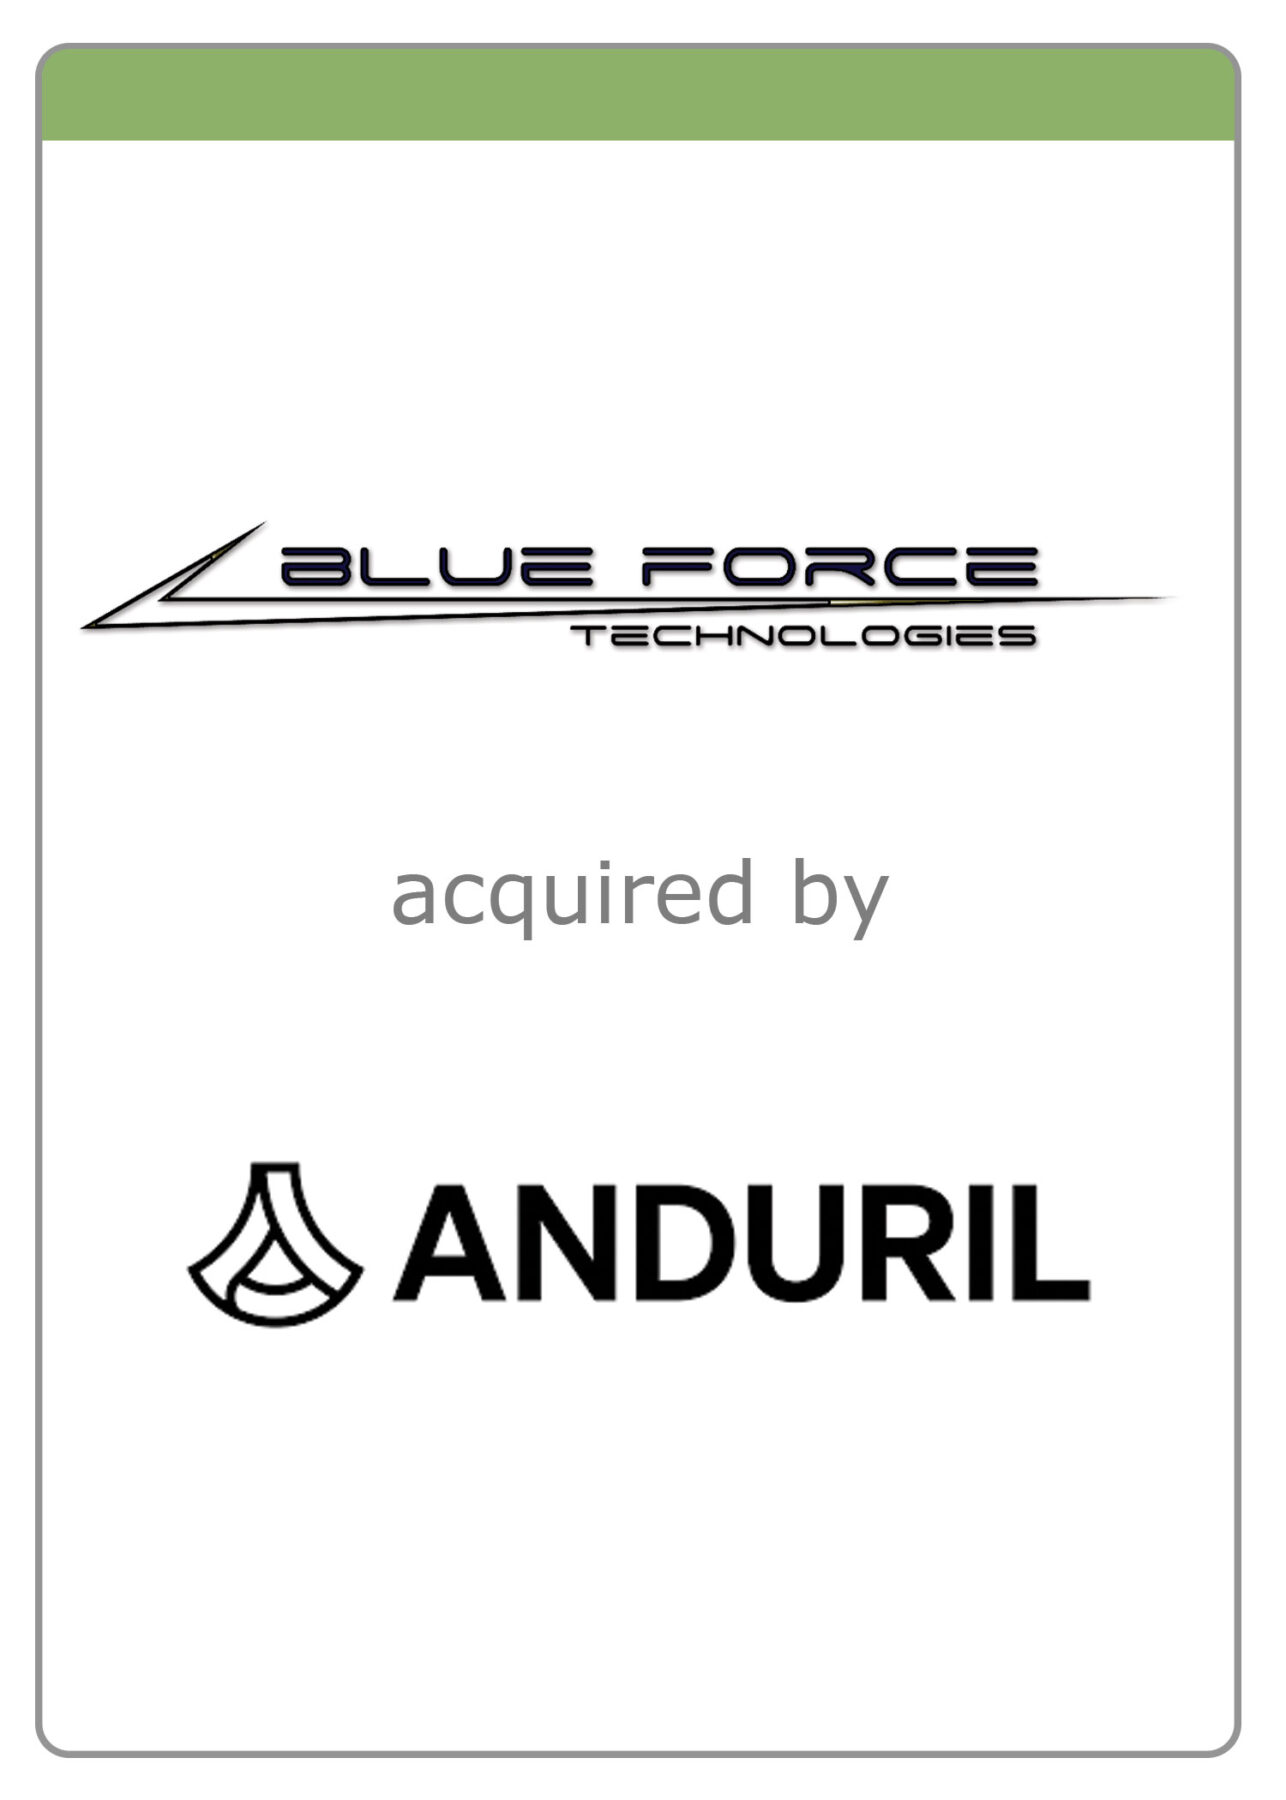 McLean Group Advises Blue Force Technologies on acquisition by Anduril Industries